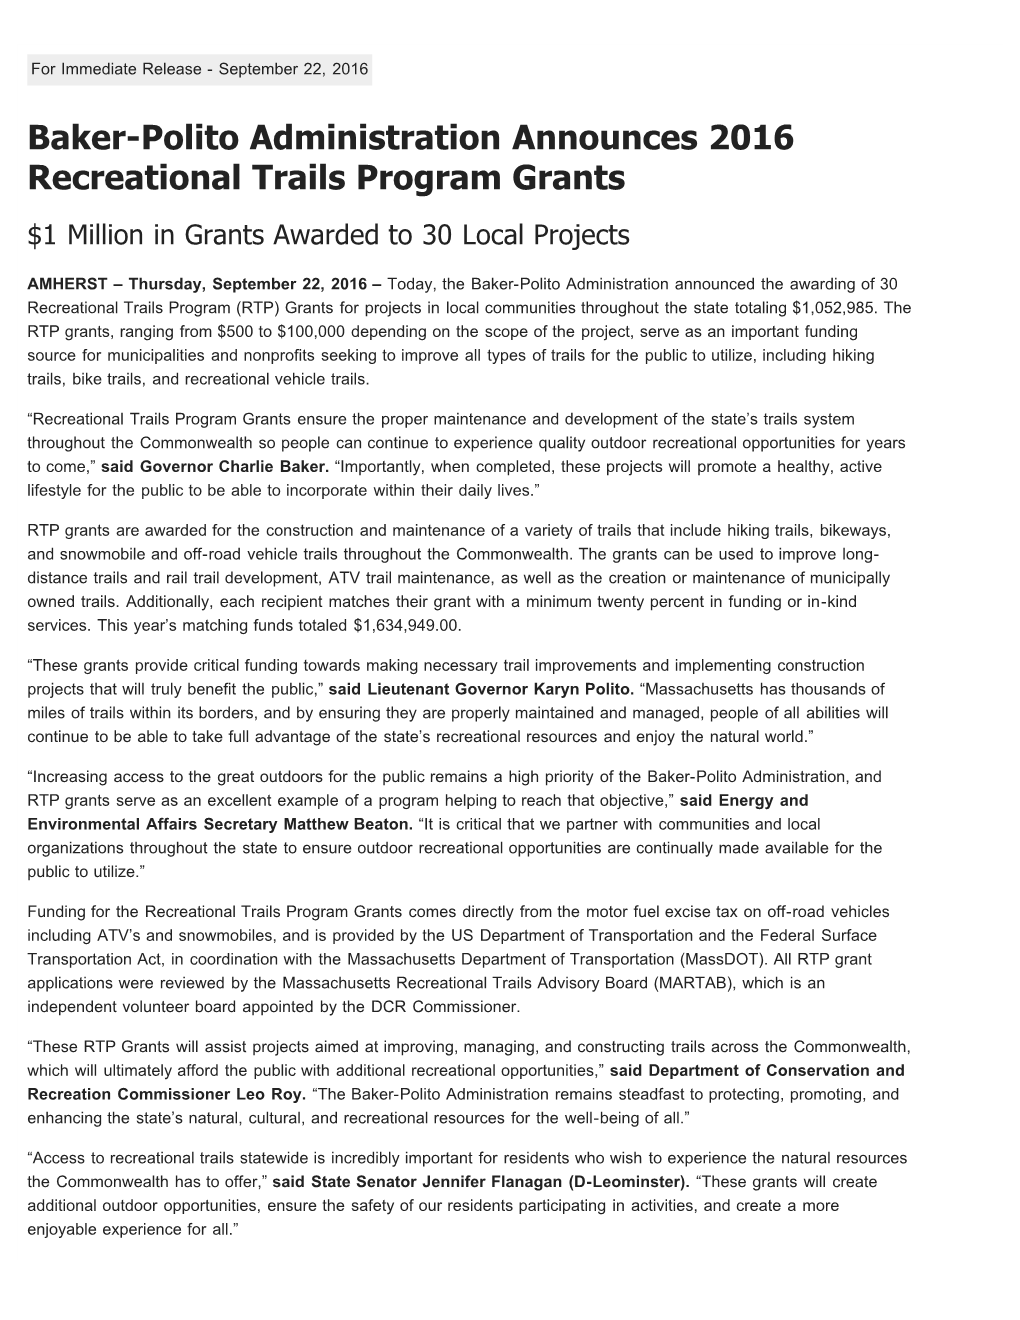 Baker-Polito Administration Announces 2016 Recreational Trails Program Grants $1 Million in Grants Awarded to 30 Local Projects